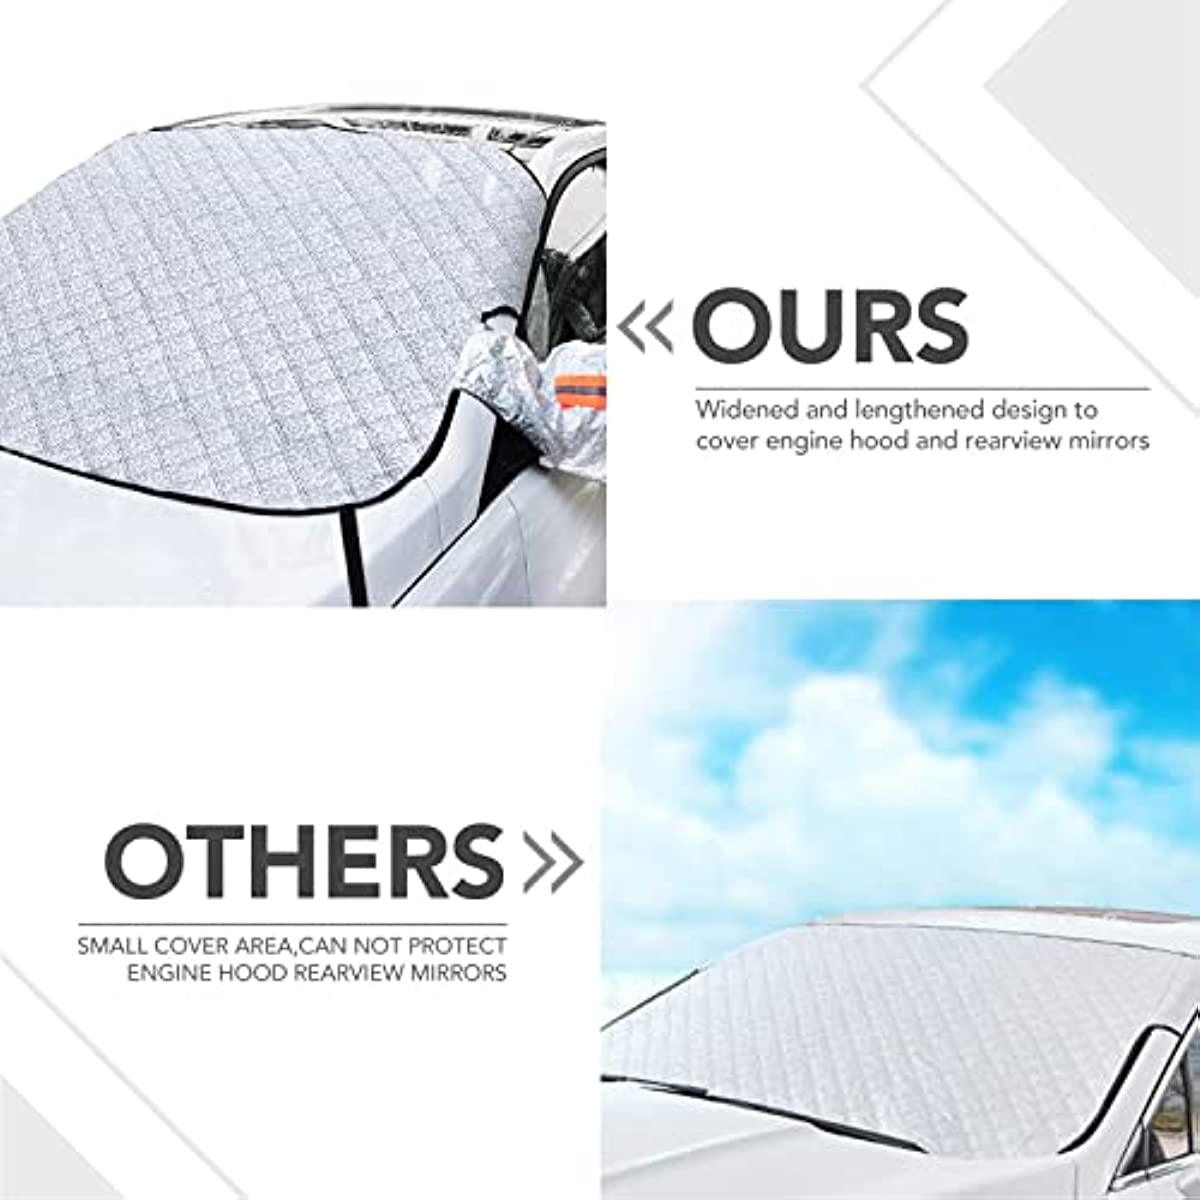 Kinglyday Windshield Snow Cover Front Window Cover for Snow, Ice & Wiper Protector | All Weather Car Sunshade Fits Most Sedans - KinglyDay